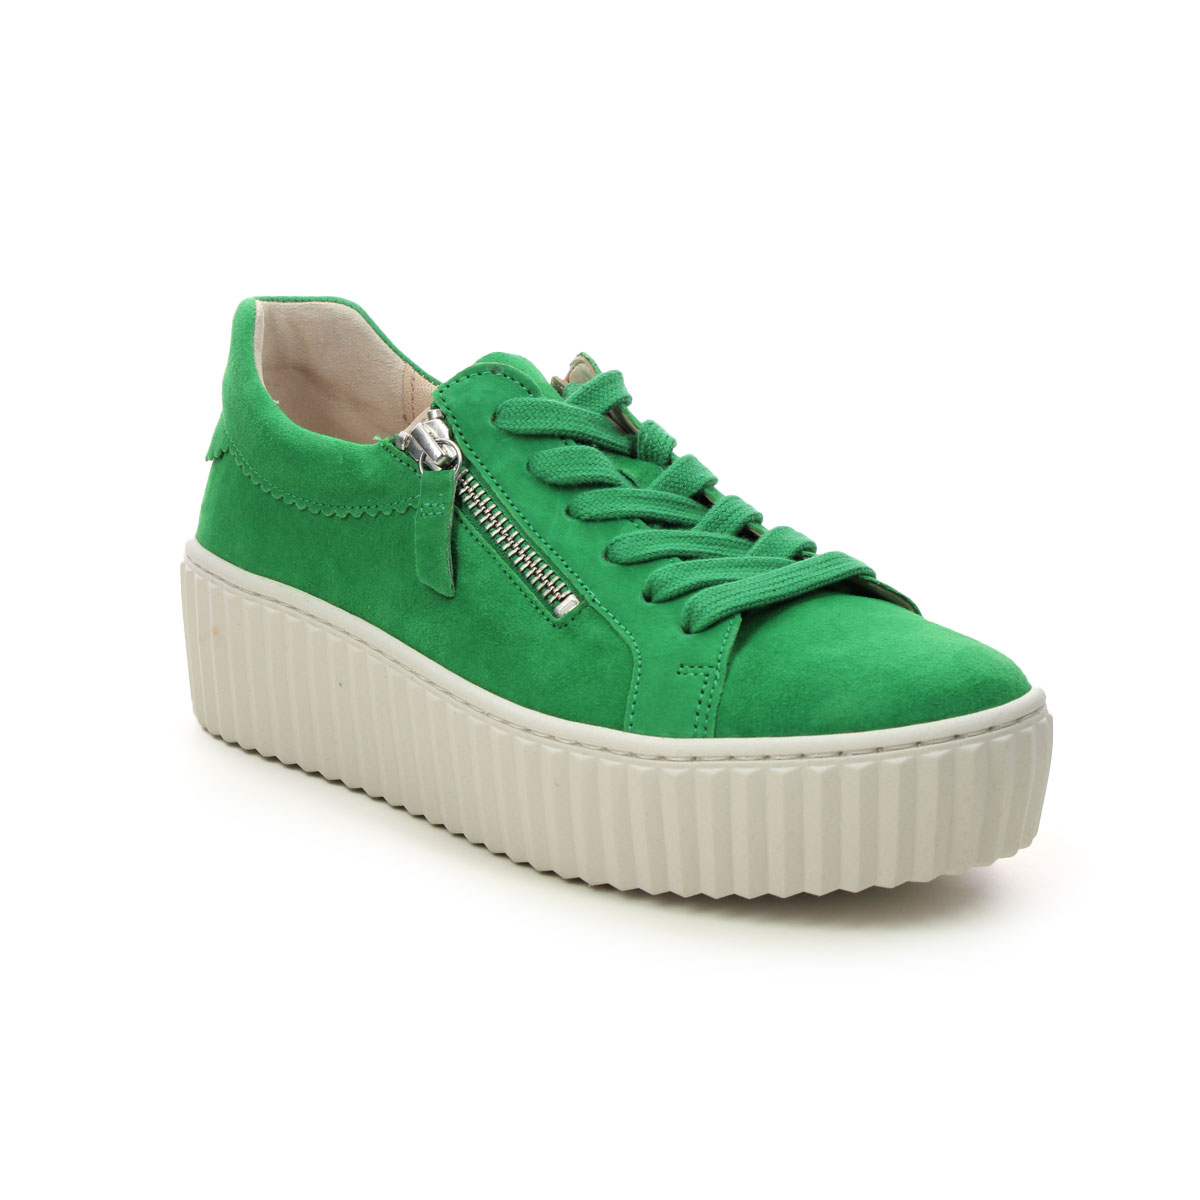 Gabor Dolly Green Suede Womens trainers 43.200.31 in a Plain Leather in Size 5.5